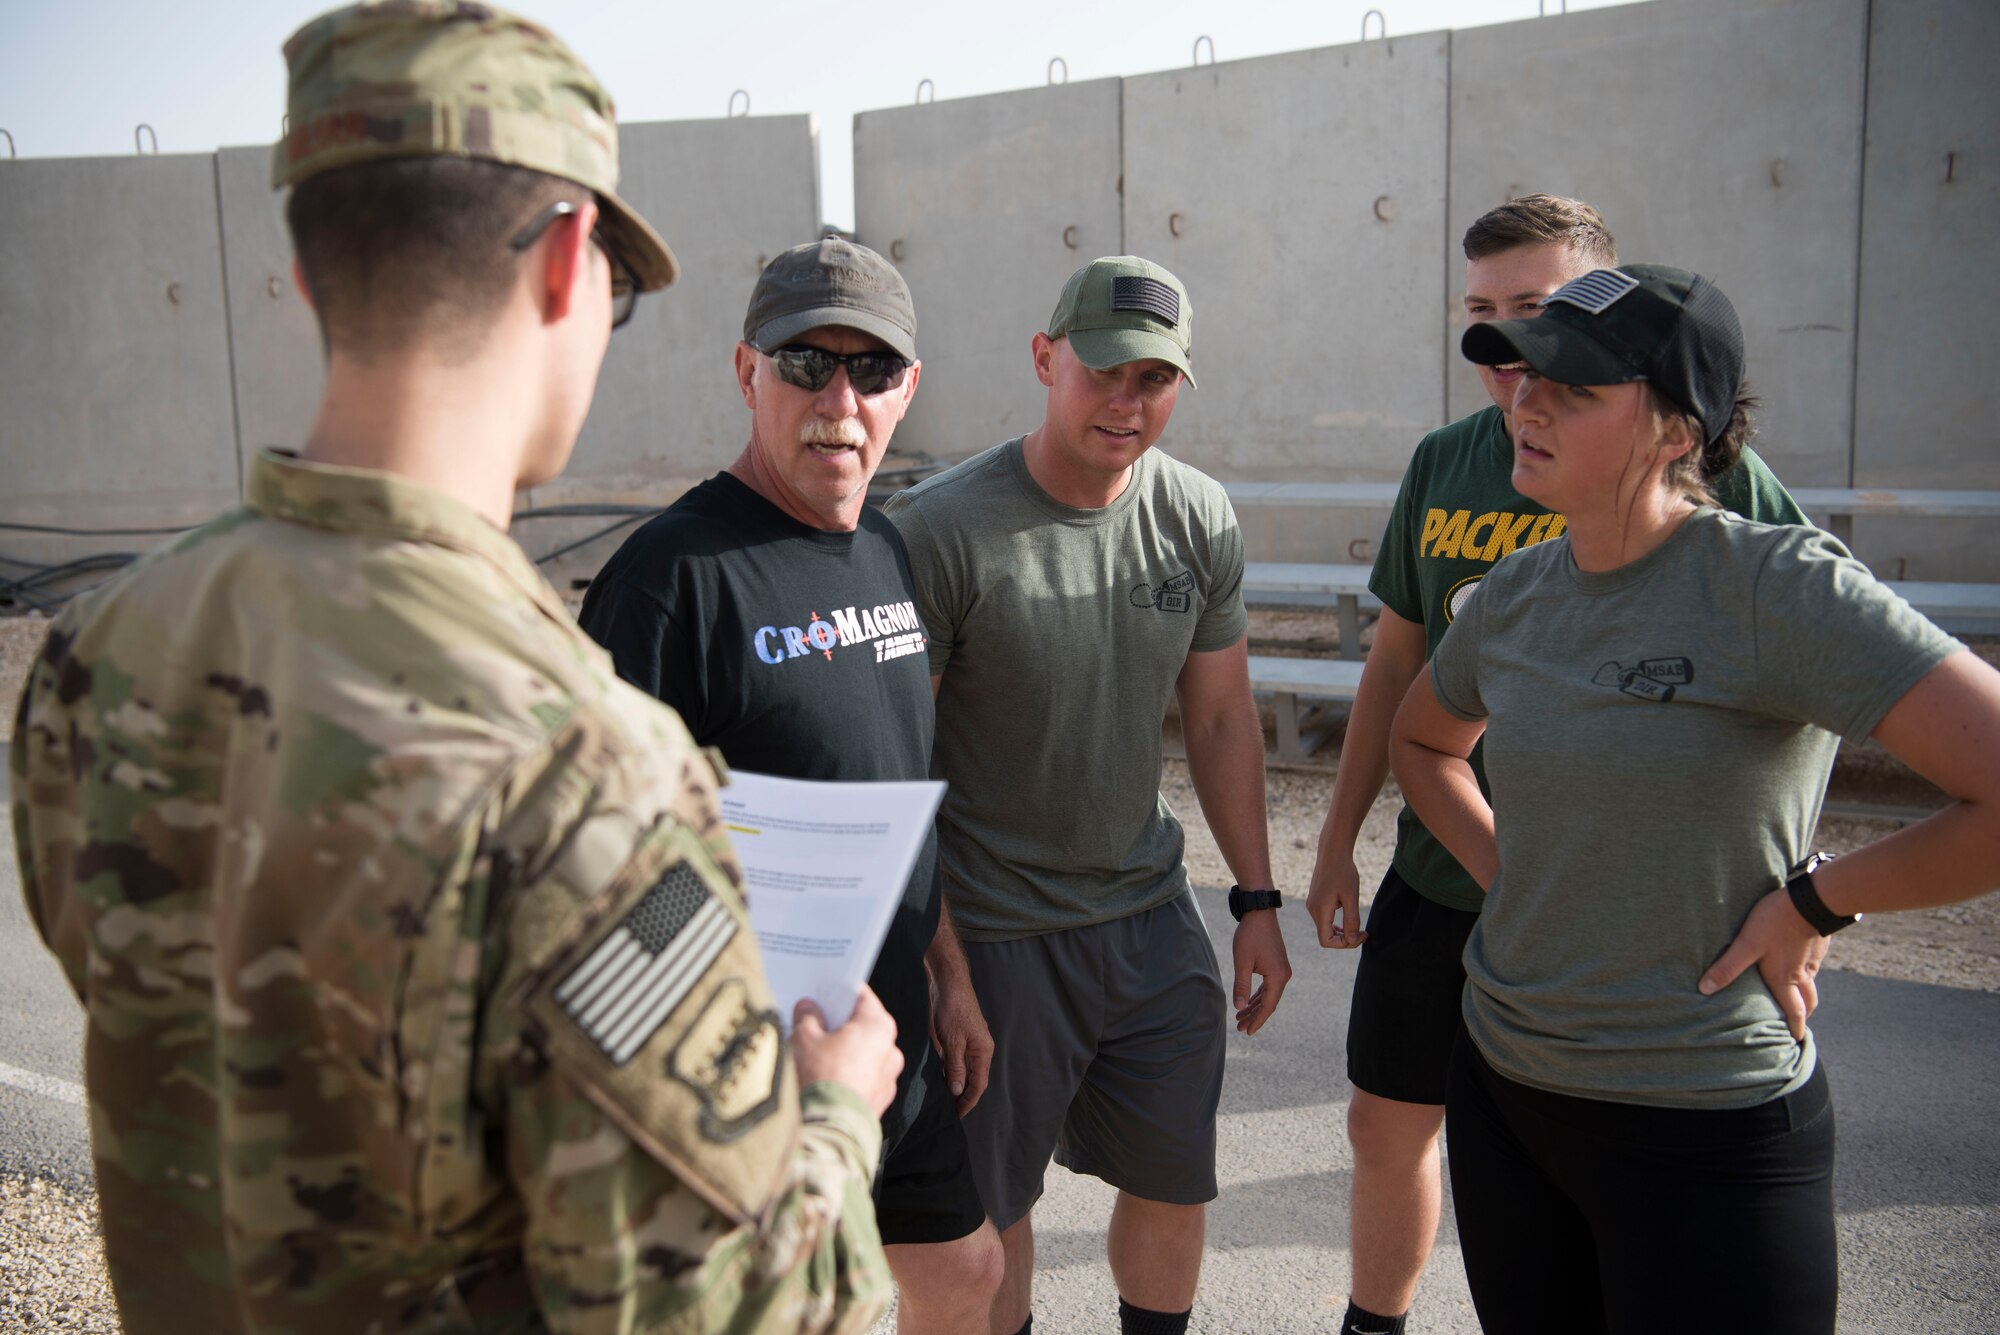 Airmen listen to a scenario question during the Commander’s Challenge, which the Sexual Assault Prevention and Response office hosted at an undisclosed location in Southwest Asia May 4, 2018.